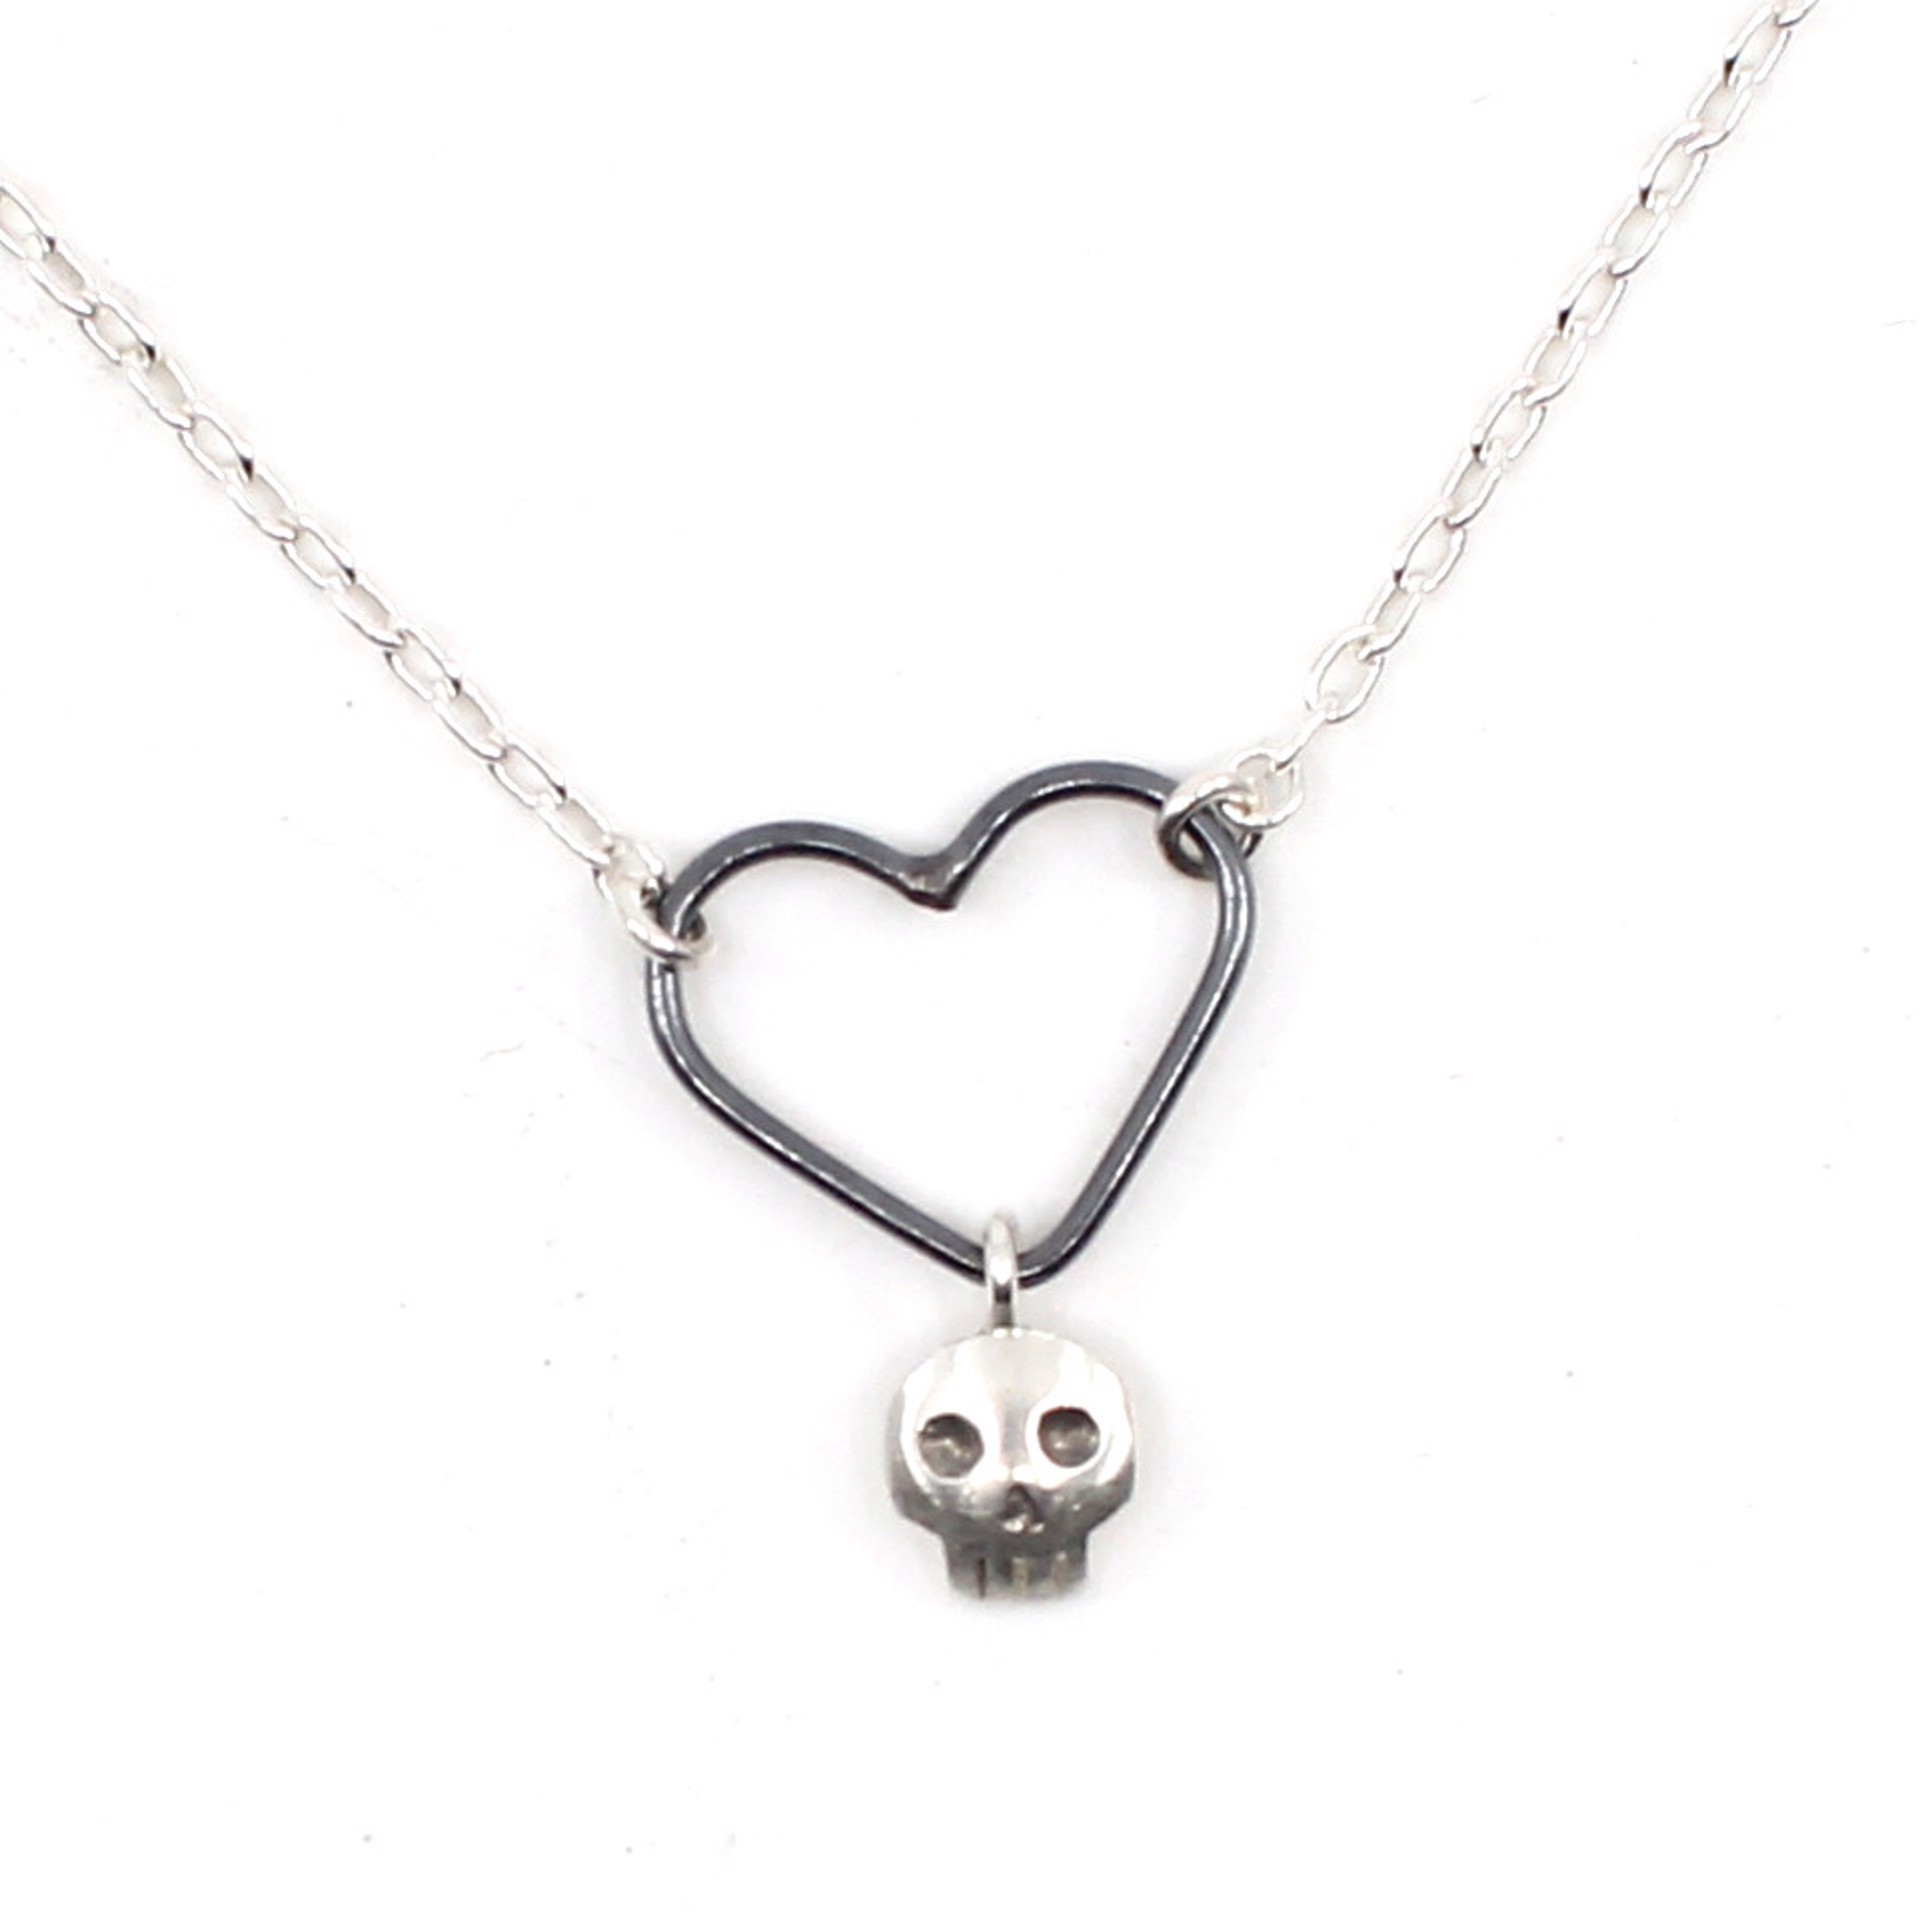 Heart Skull Dangle Necklace by Susan Elnora